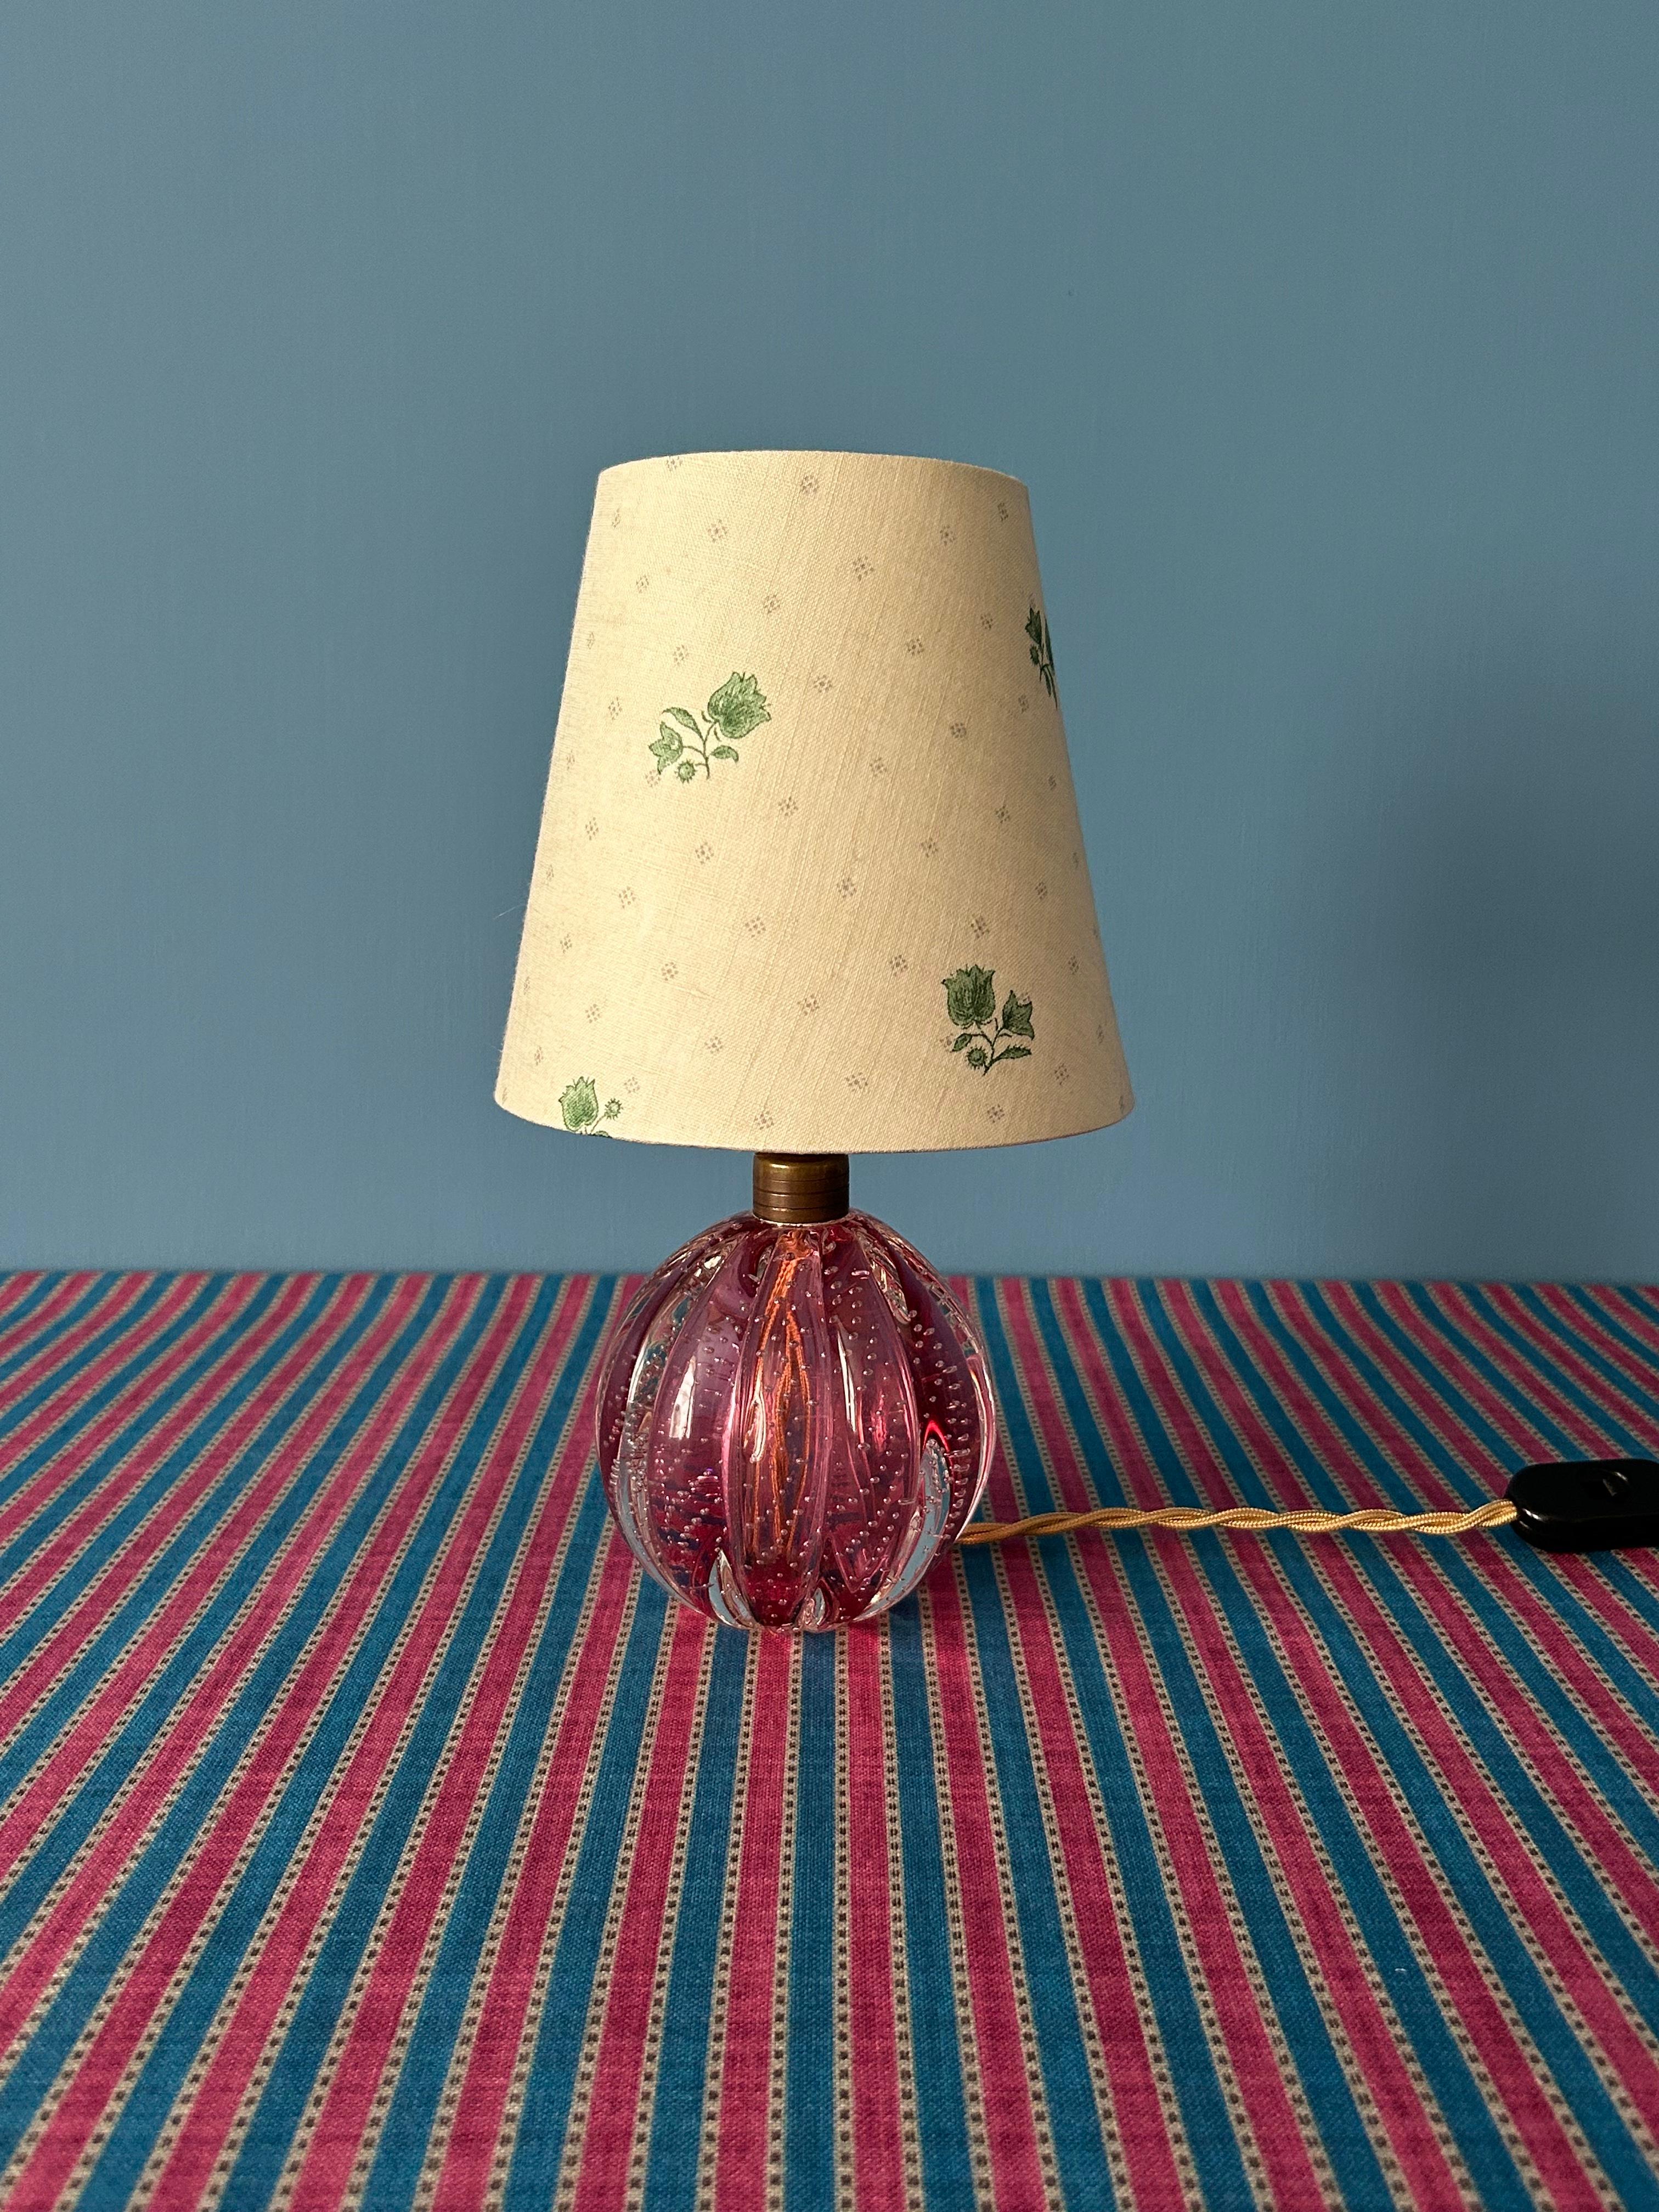 Italian Vintage Pink Murano Table Lamp with Customized Green Floral Shade, Italy, 1950s